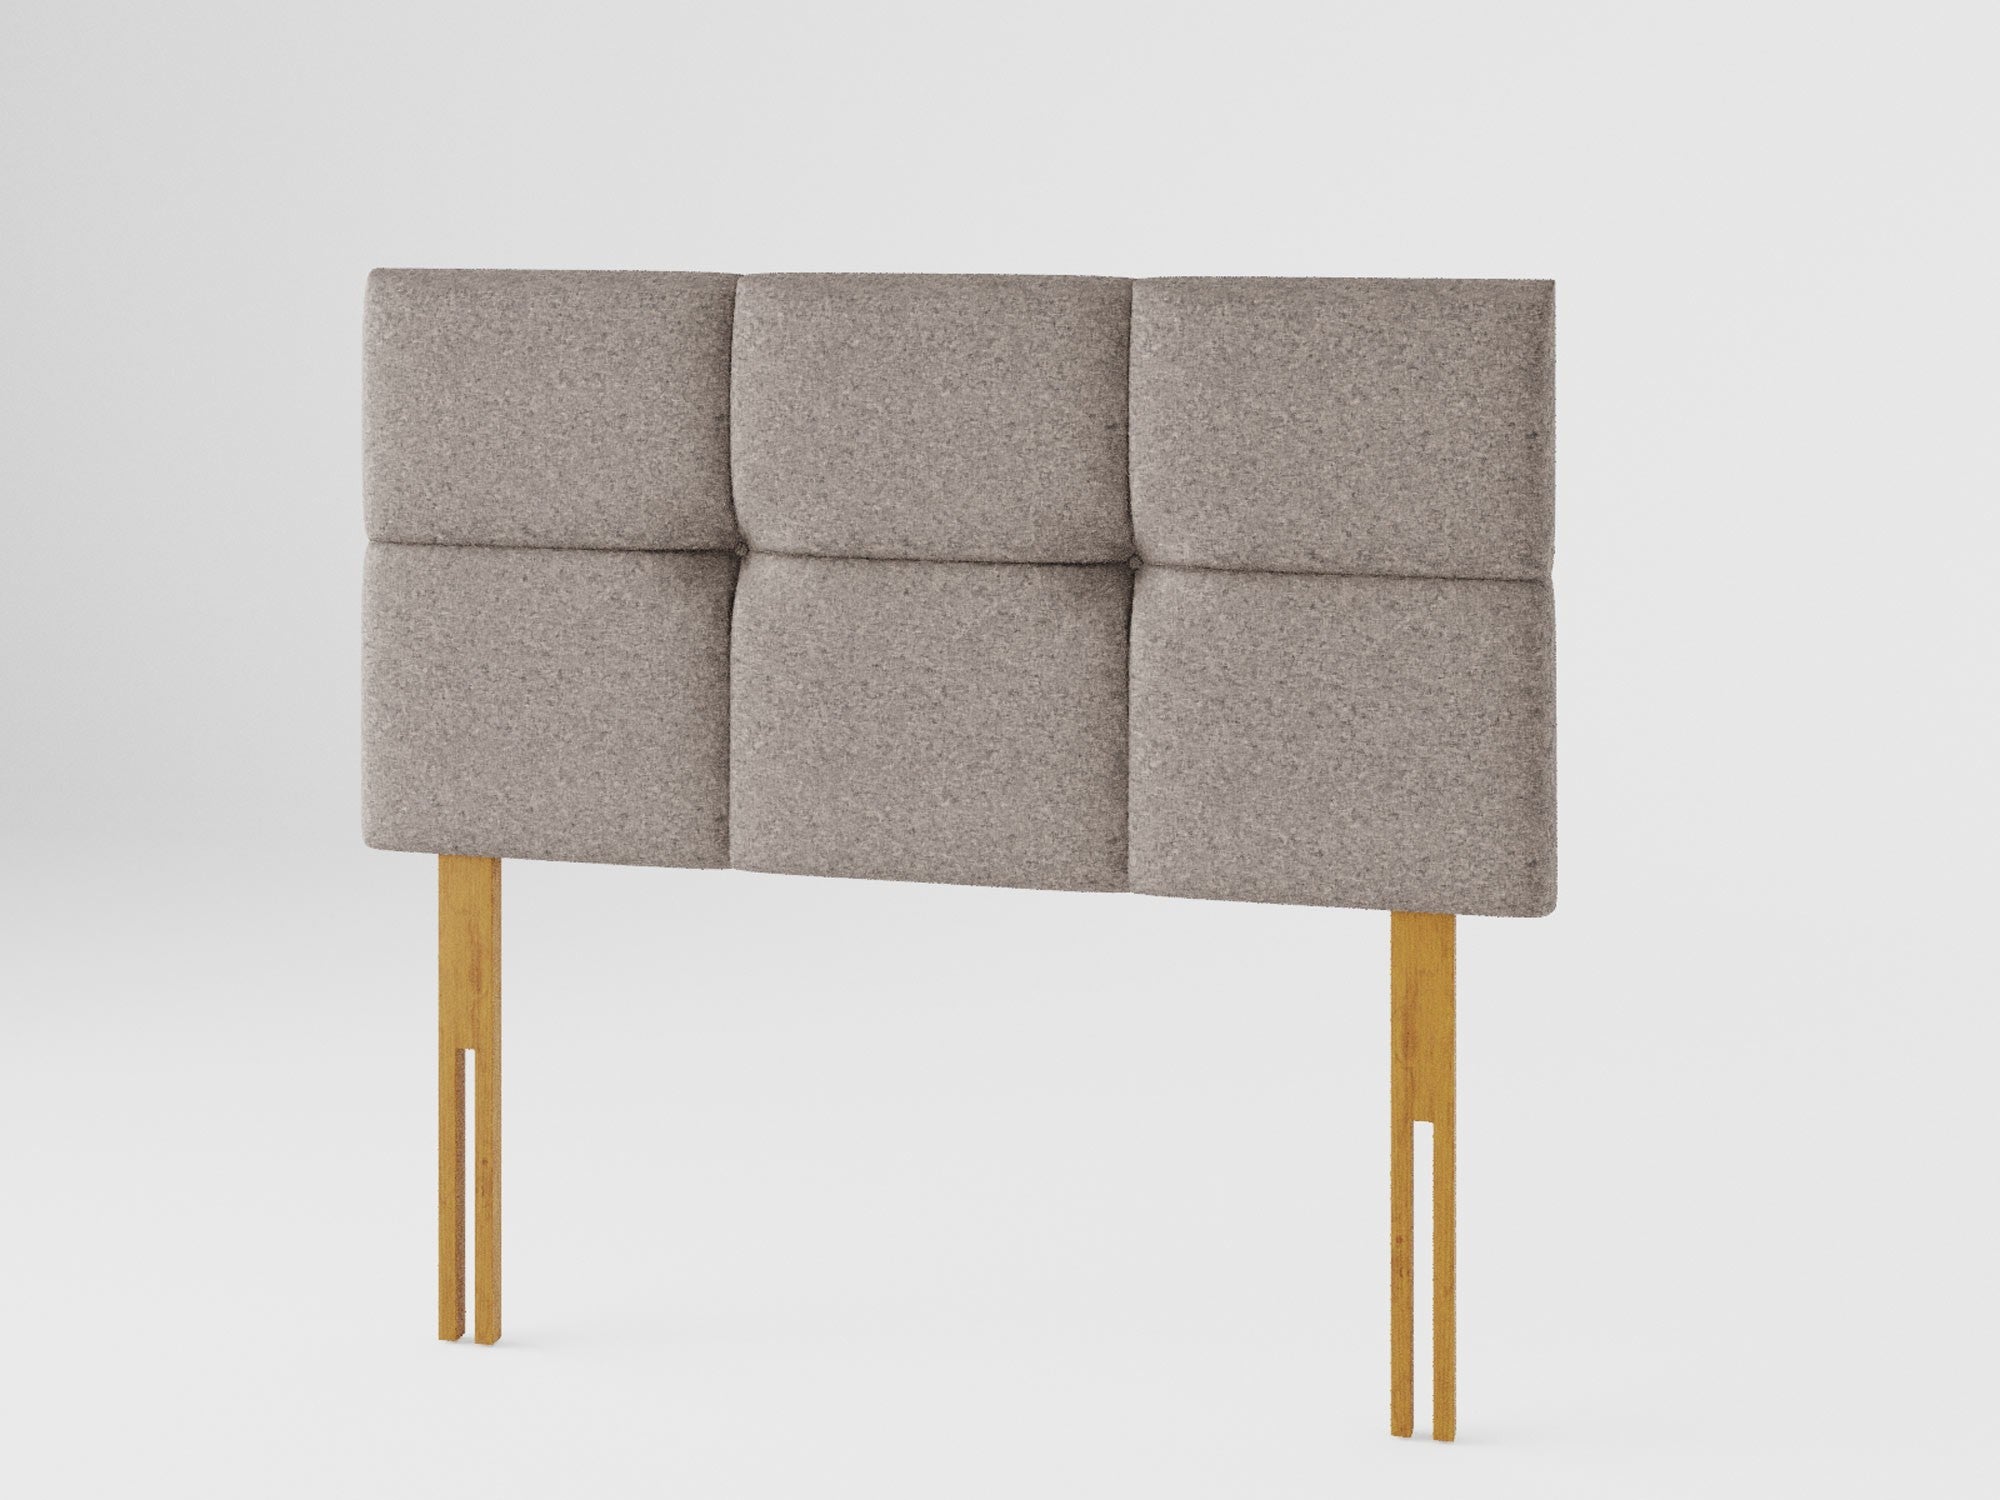 Caine Headboard 60 cm - Yorkshire Knit - Mineral